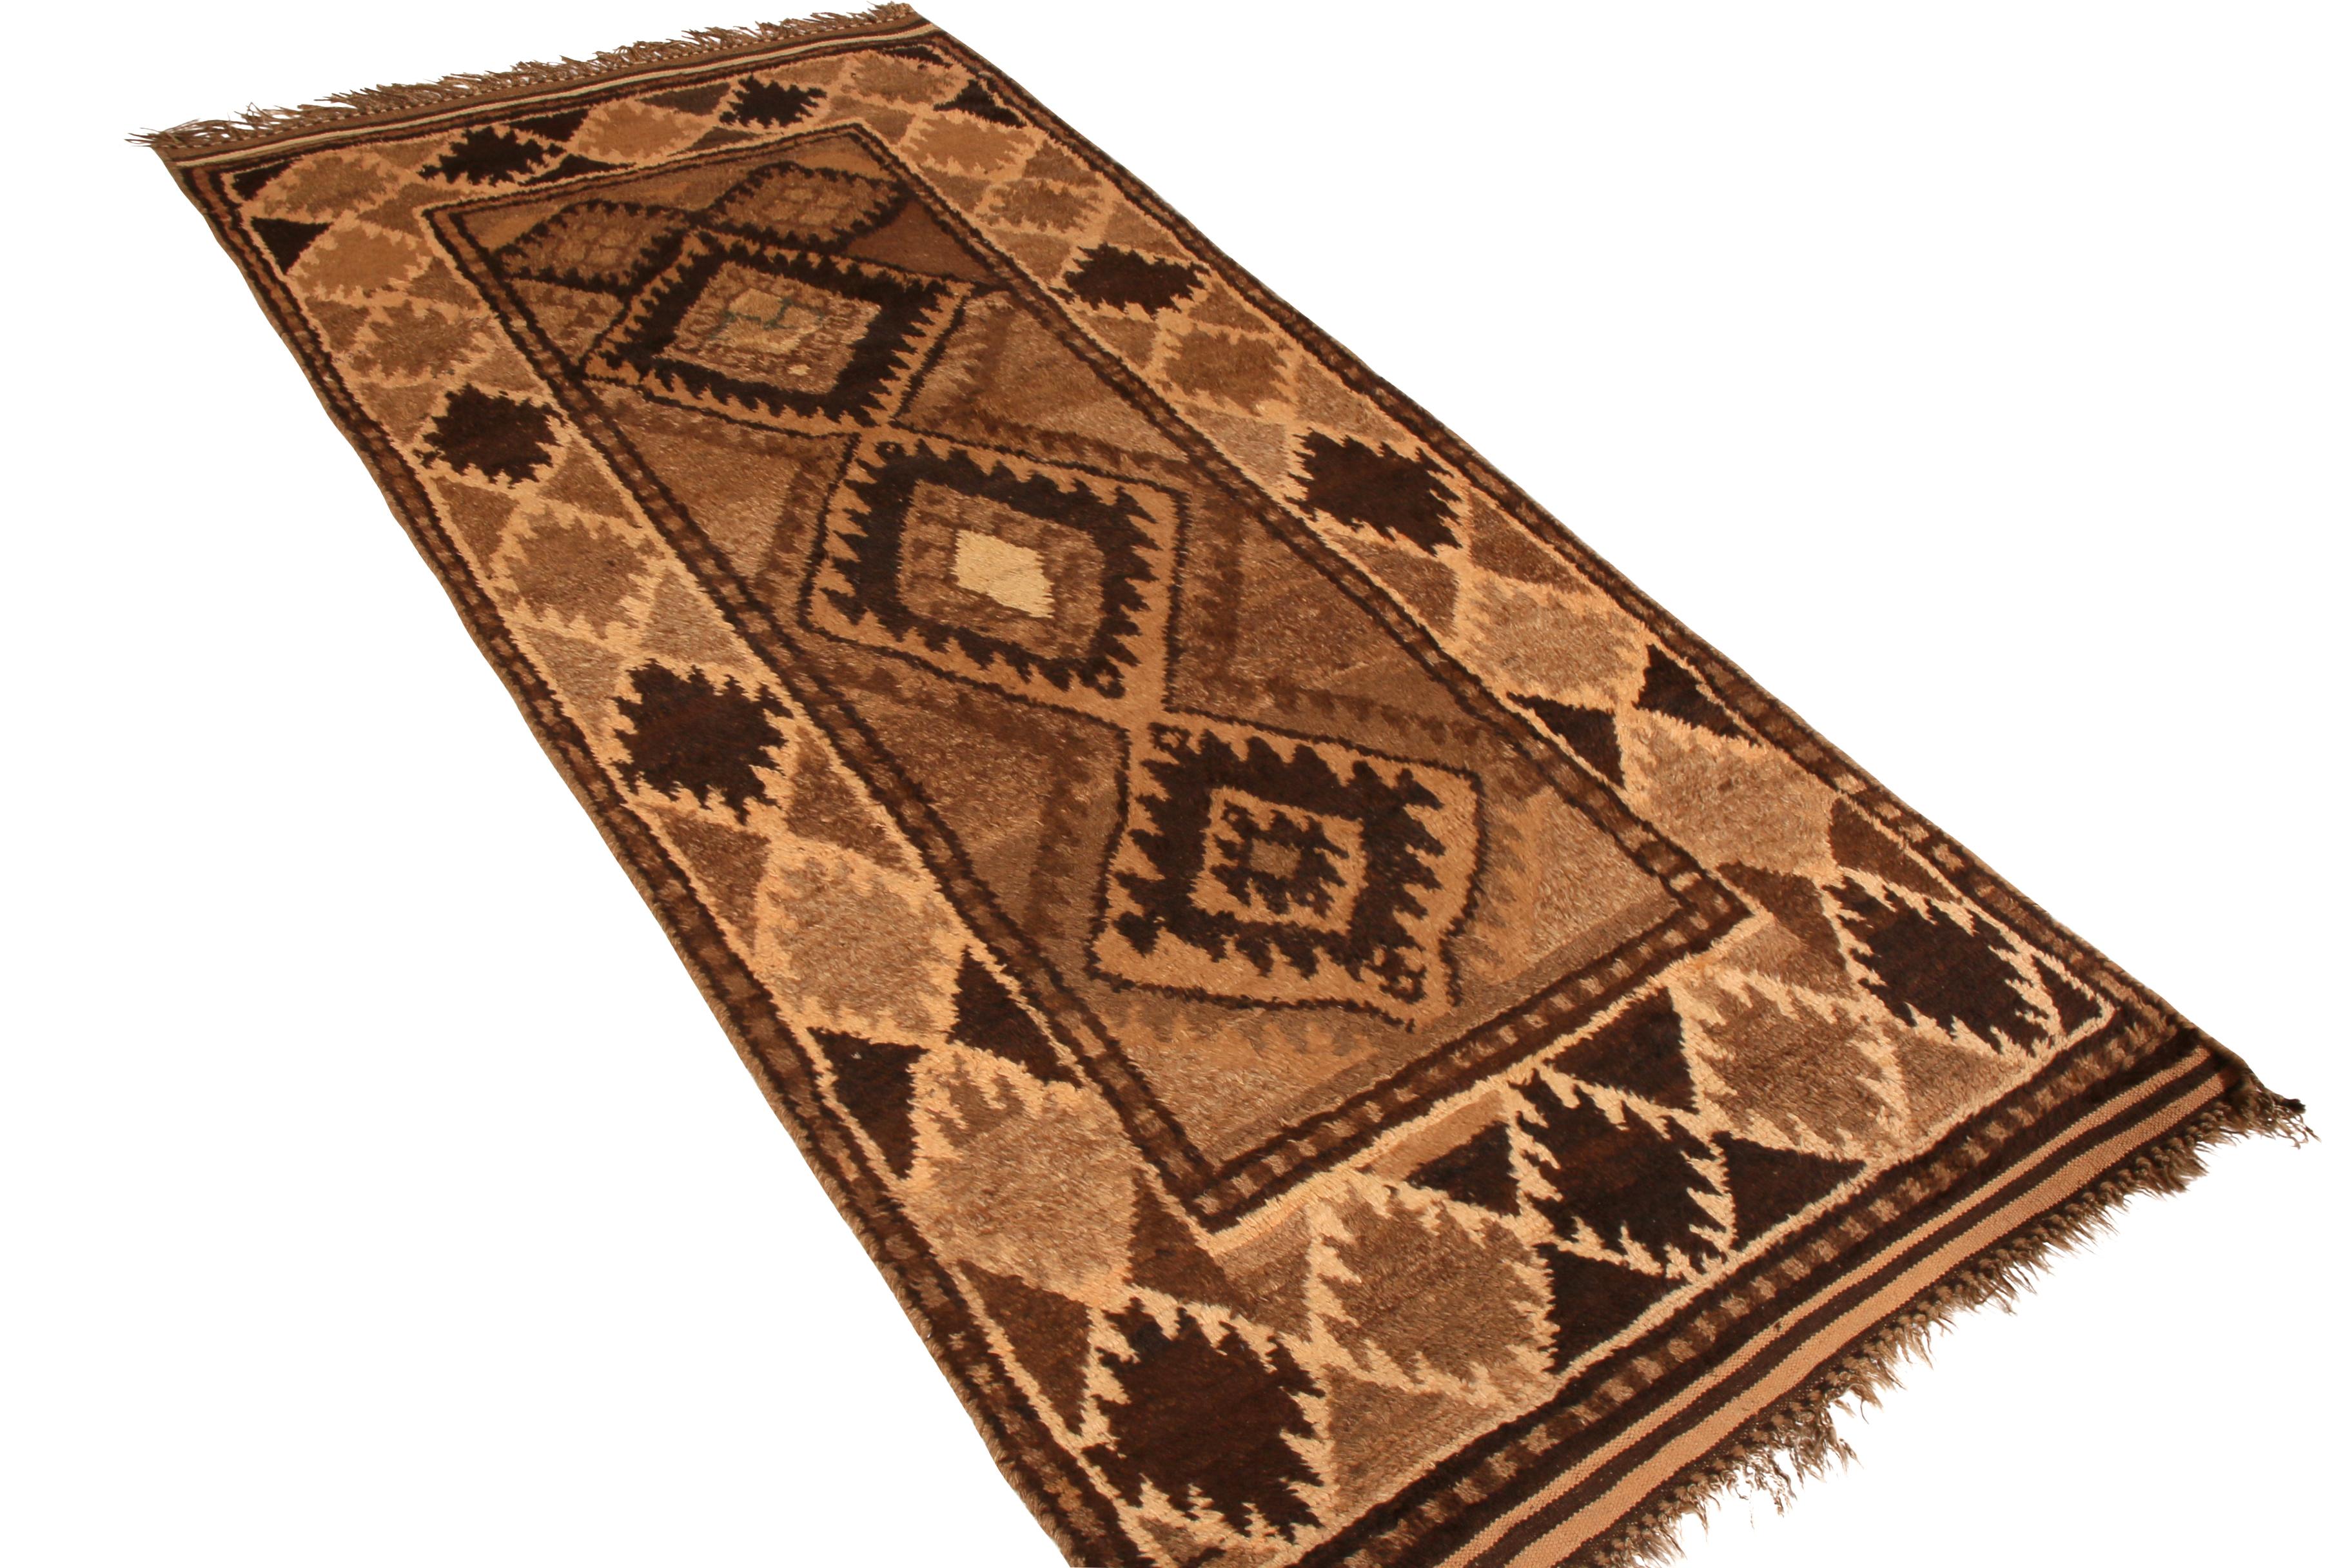 Hand knotted in wool originating circa 1950-1960 from the Baluch tribal weavers, this mid-century Persian rug marries a Classic diamond medallion pattern with the celebrated, rustic charm of beige brown enjoyed in this acclaimed tribal rug family;